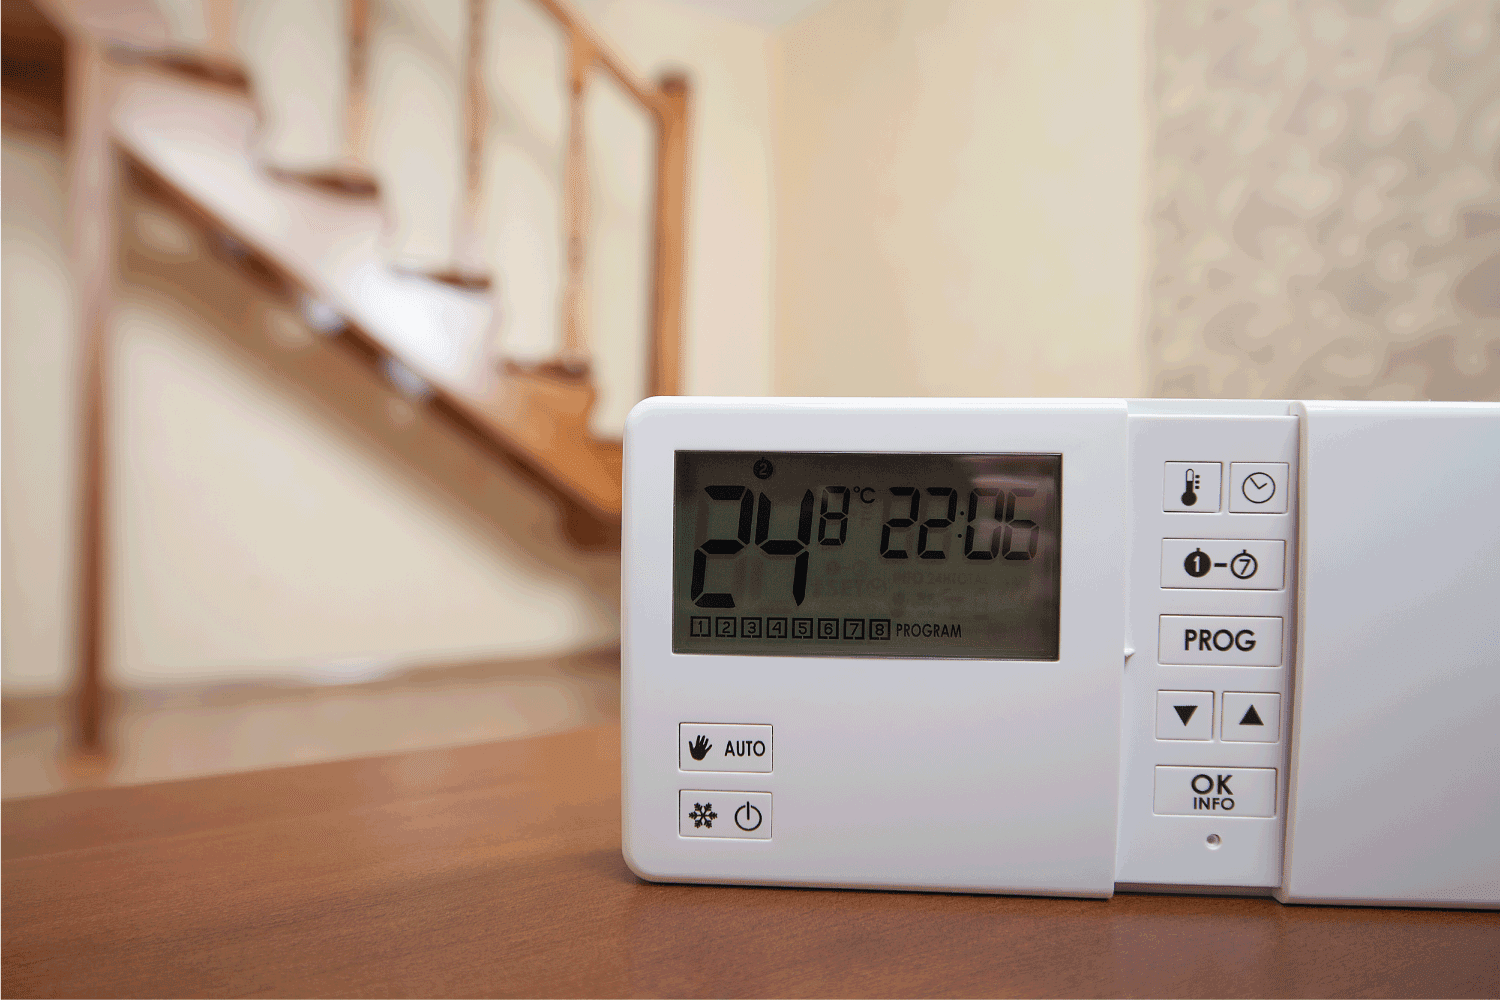 system climate control, smart house. home control